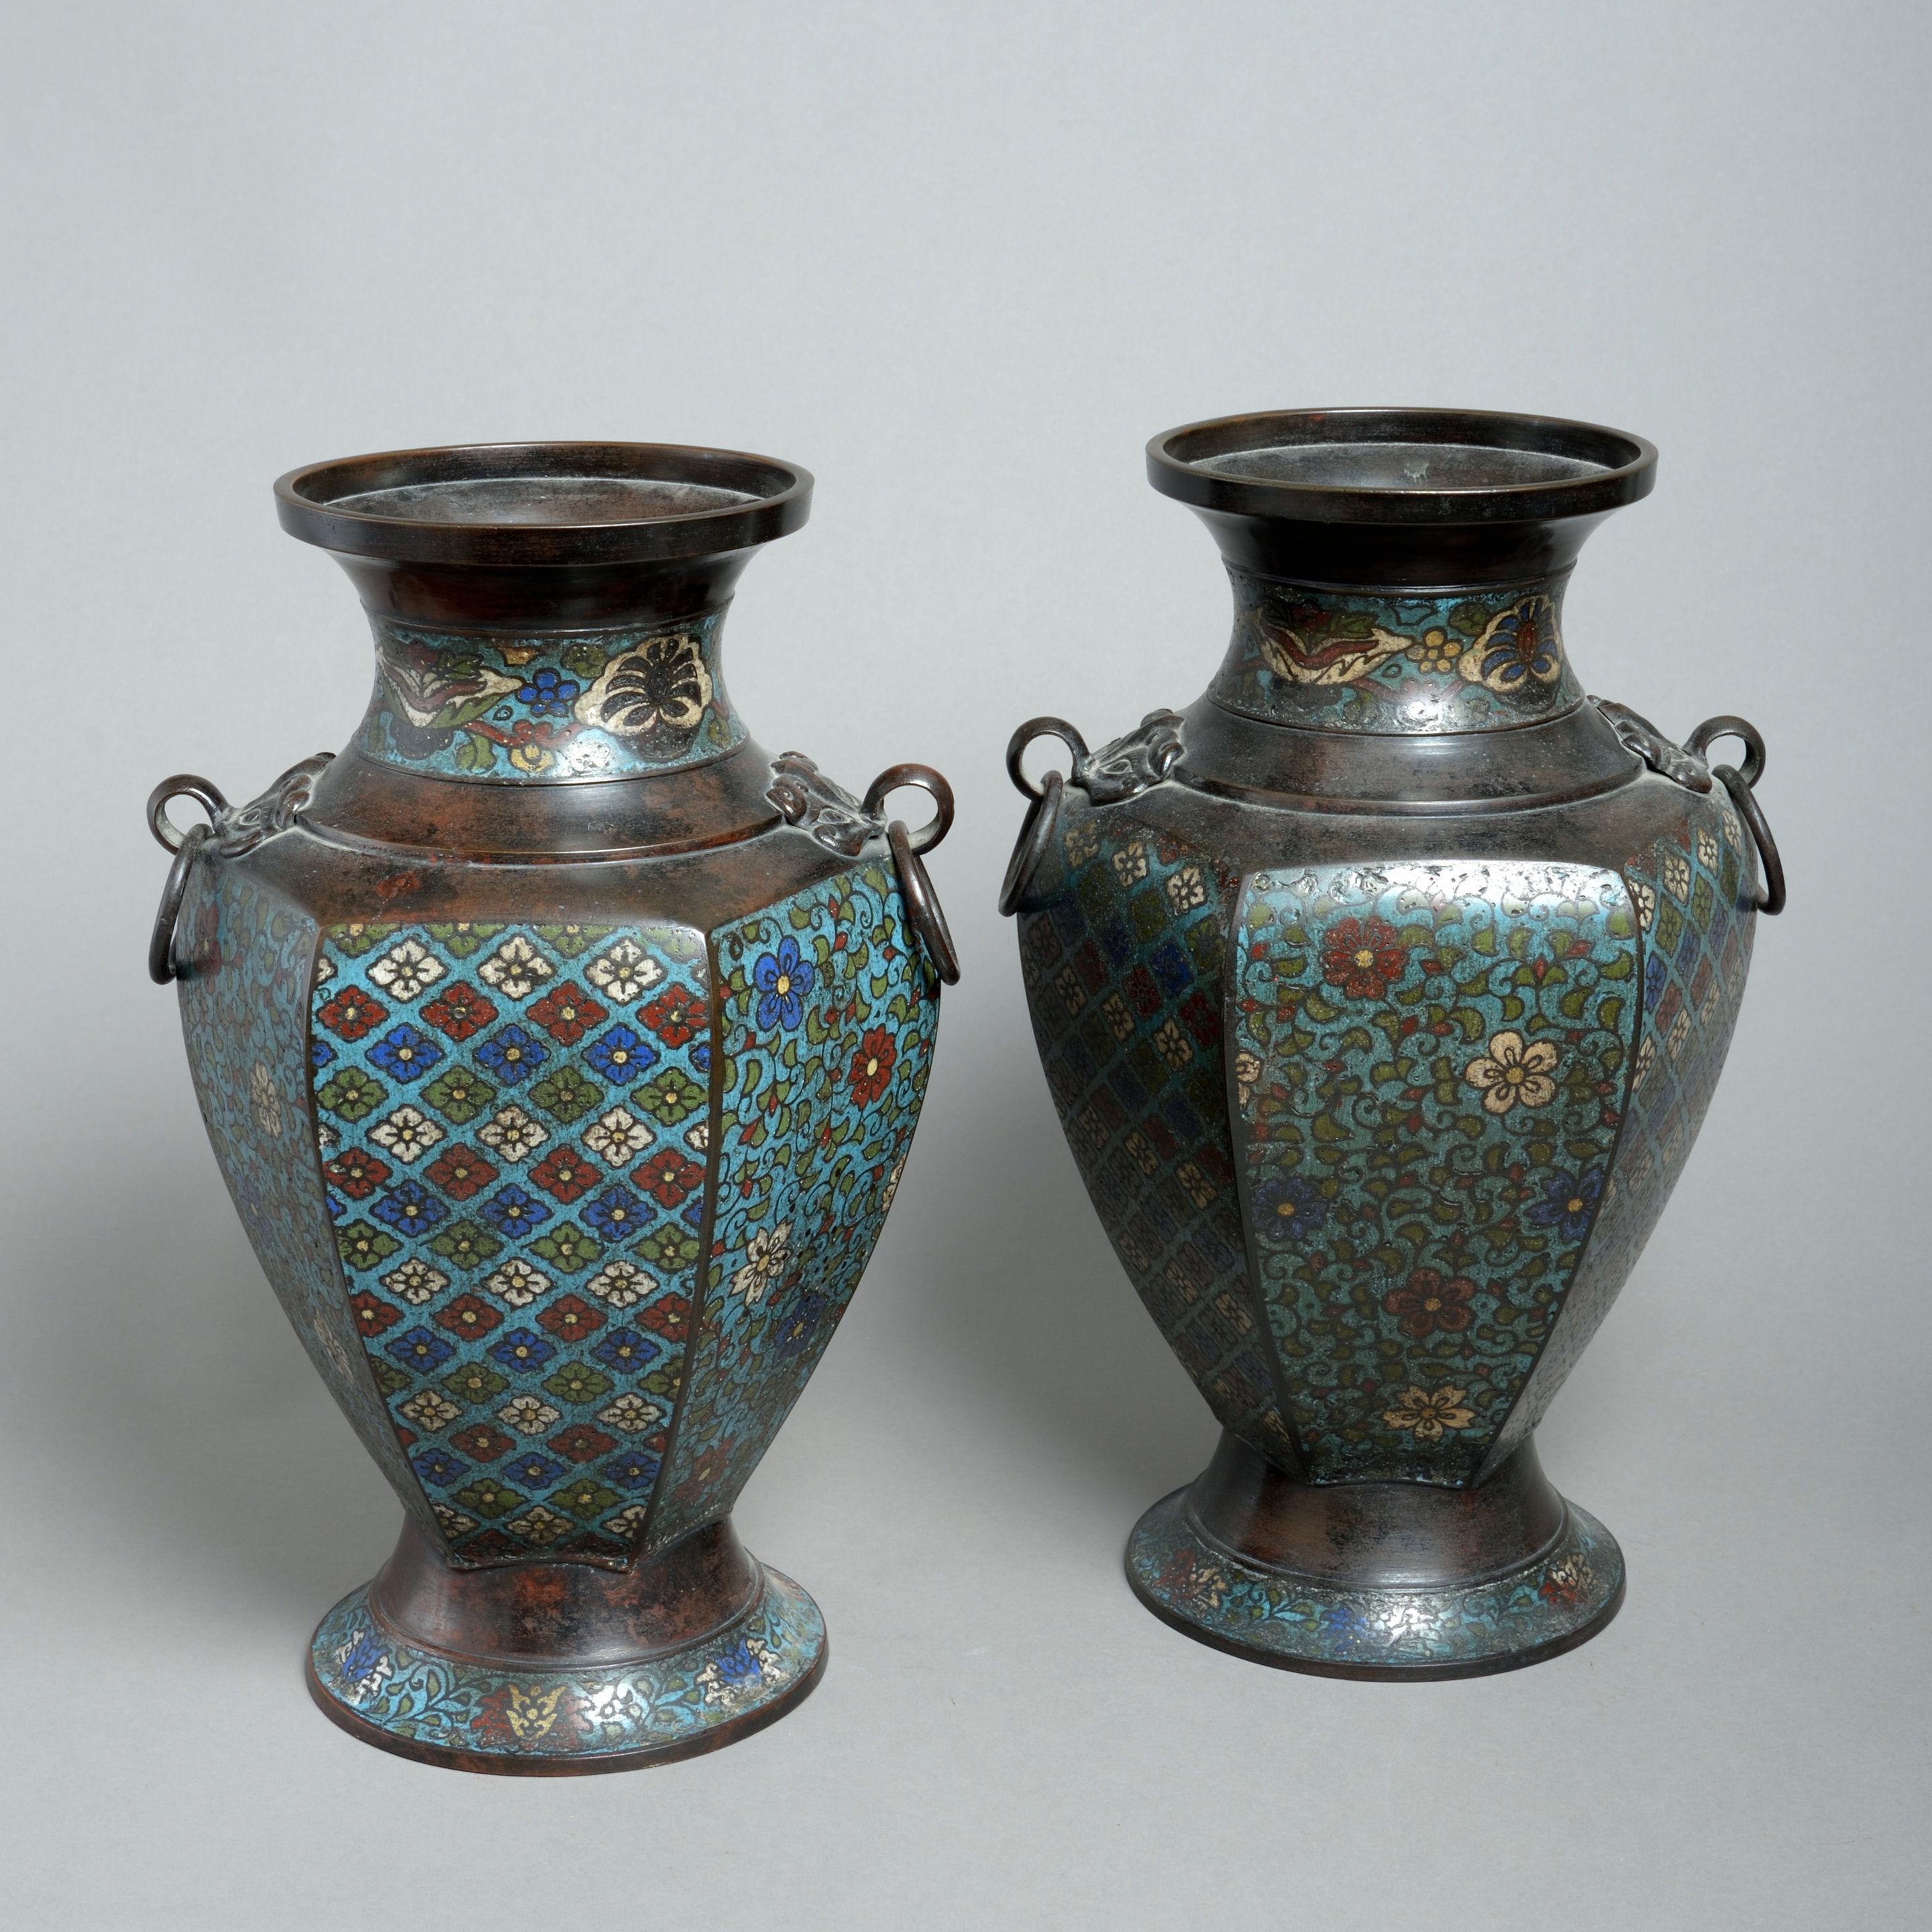 A pair of 19th century cloionné enamel vases, of faceted baluster form, with polychrome geometric decoration.
 